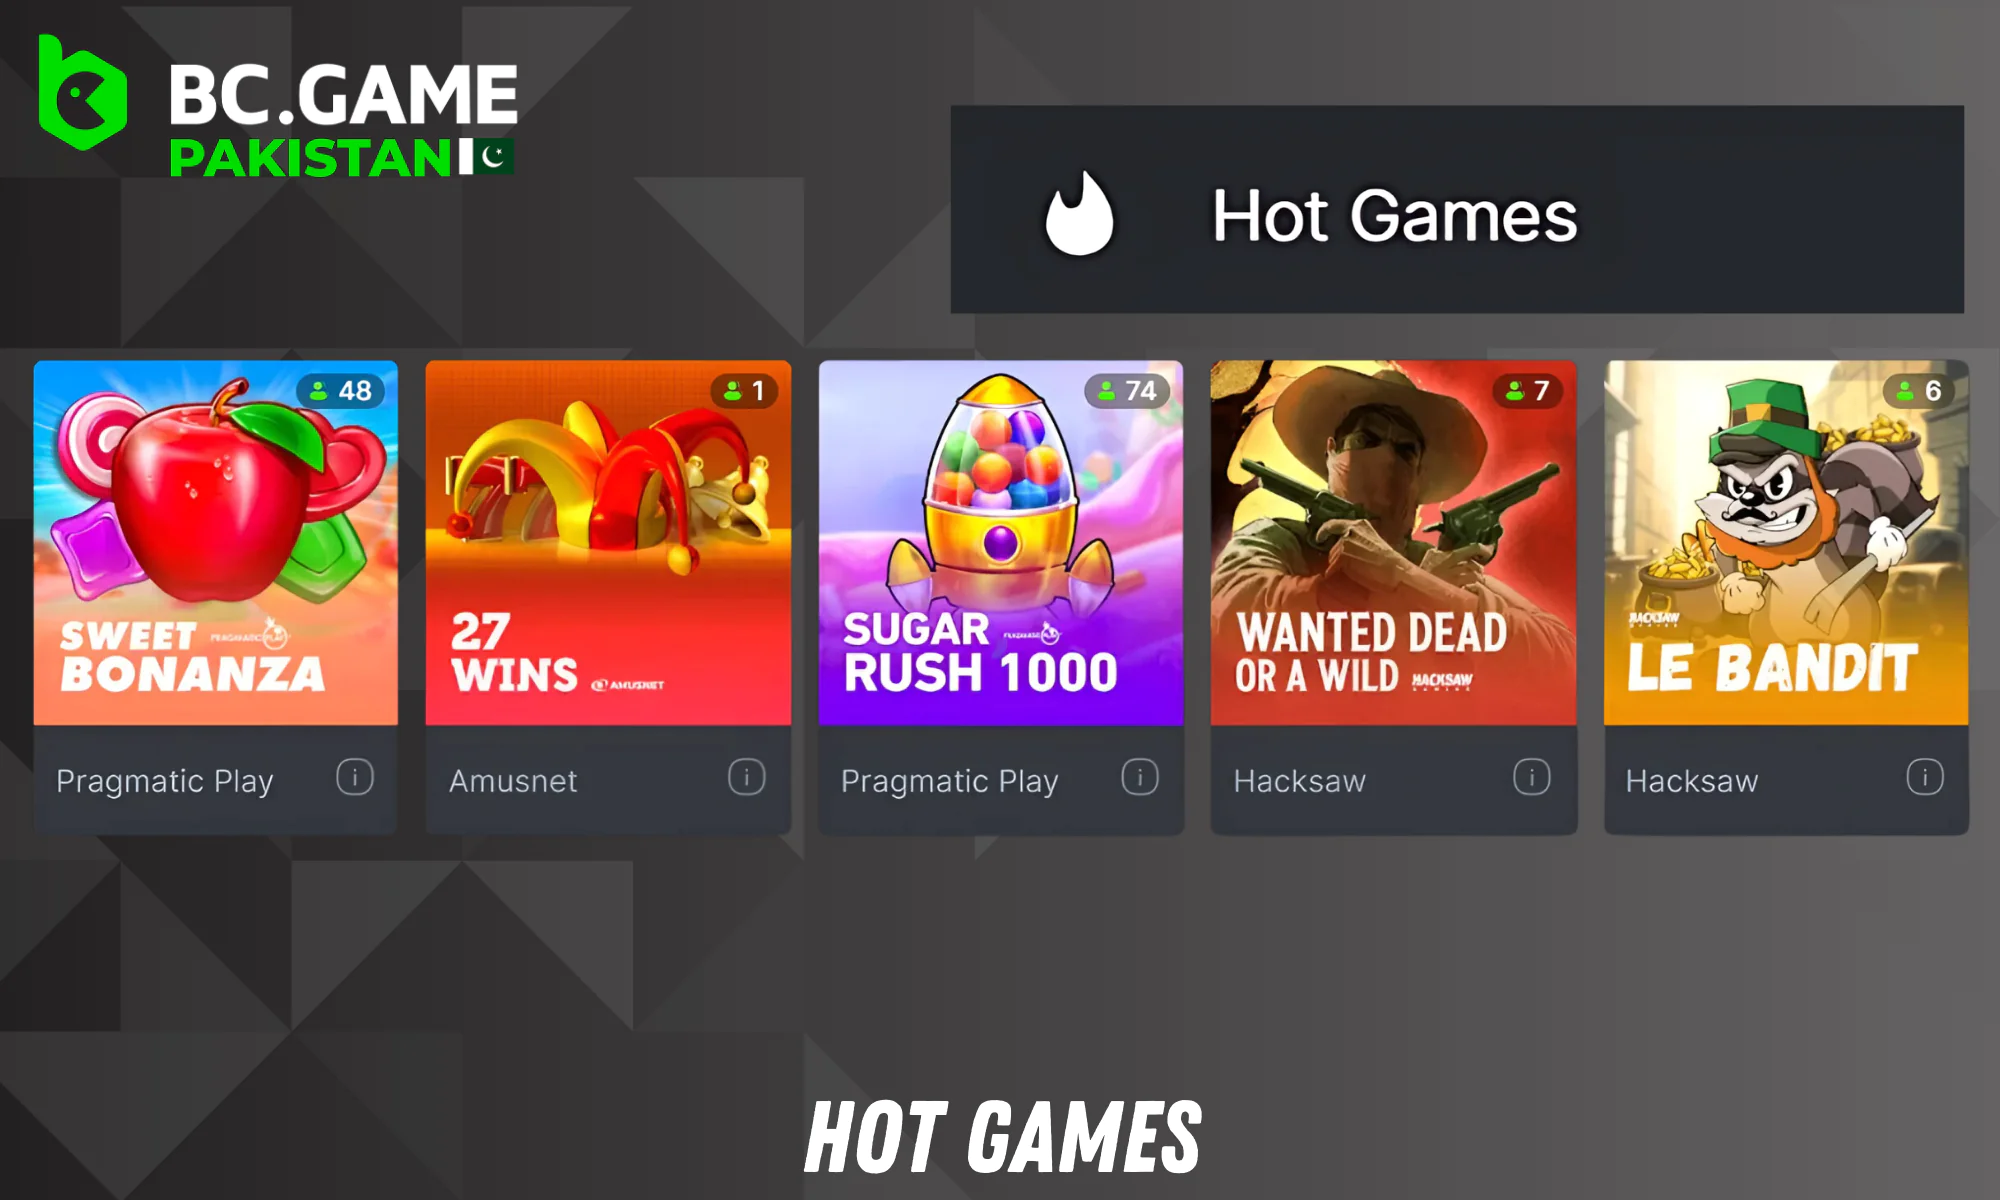 The Hot category at BC Game casino contains games that are popular among players